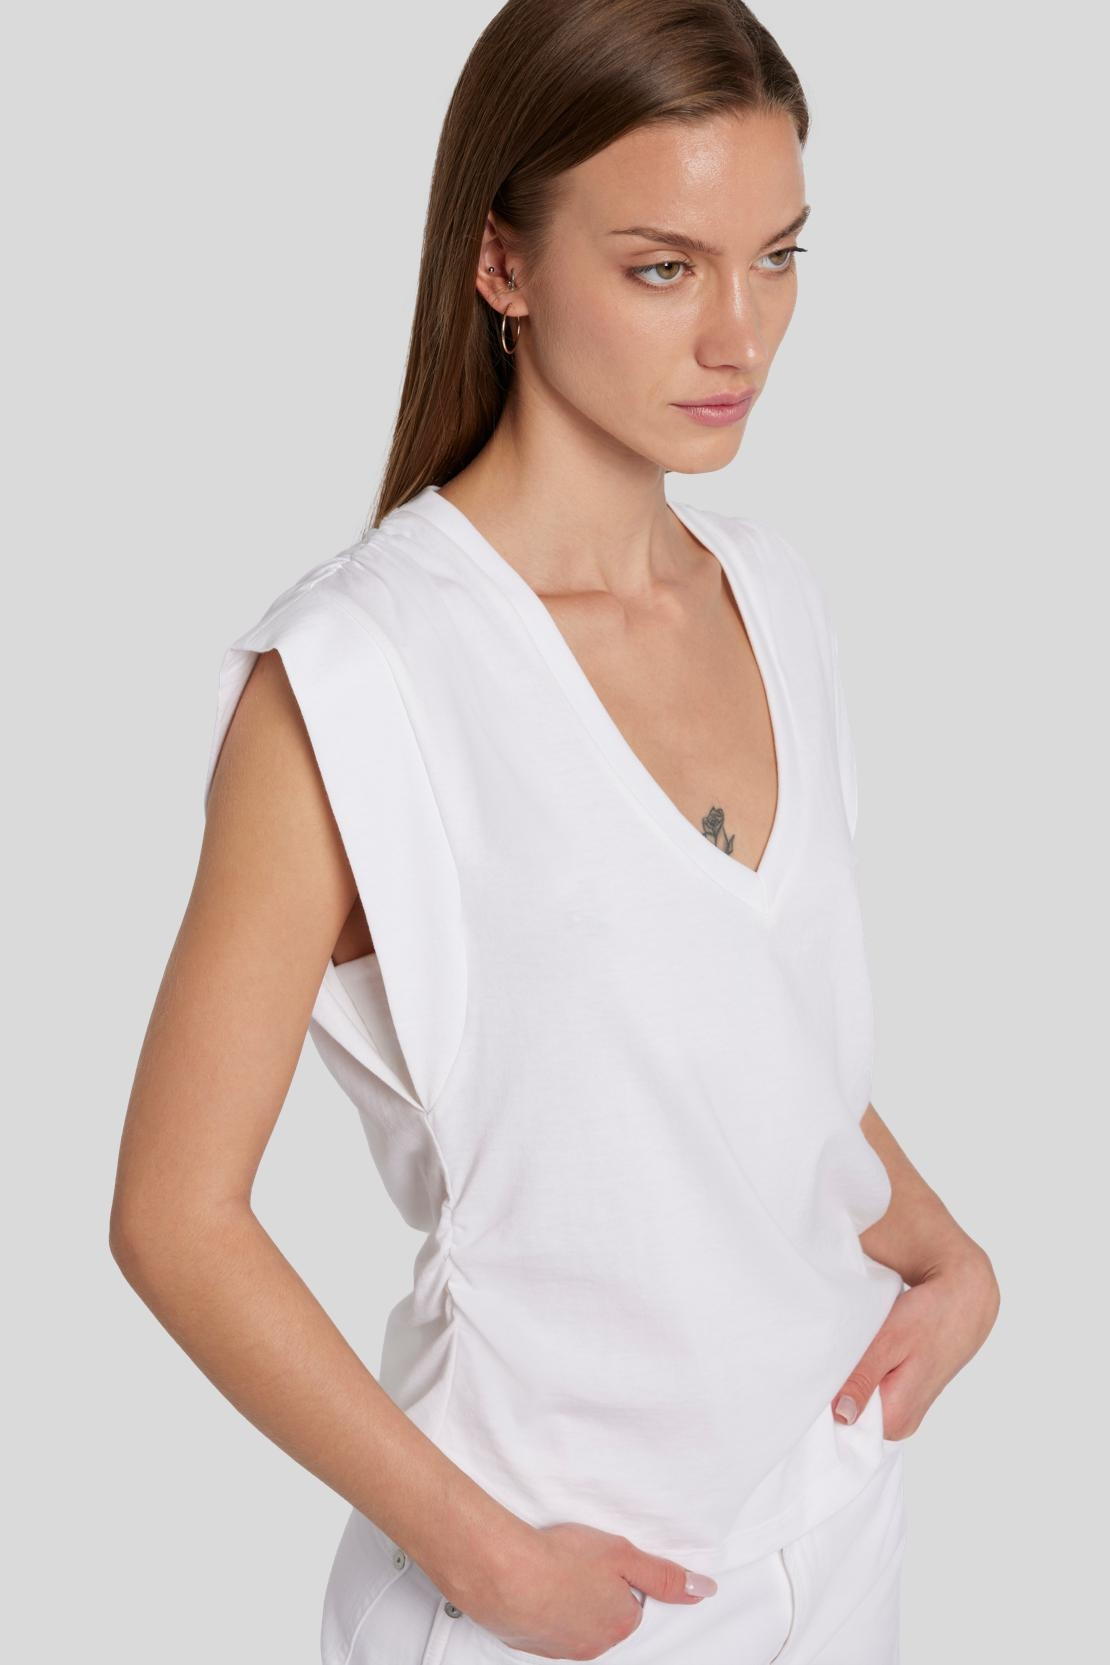 Pleated Sleeveless Tee Cotton White_JSLL5770WH_WH_06